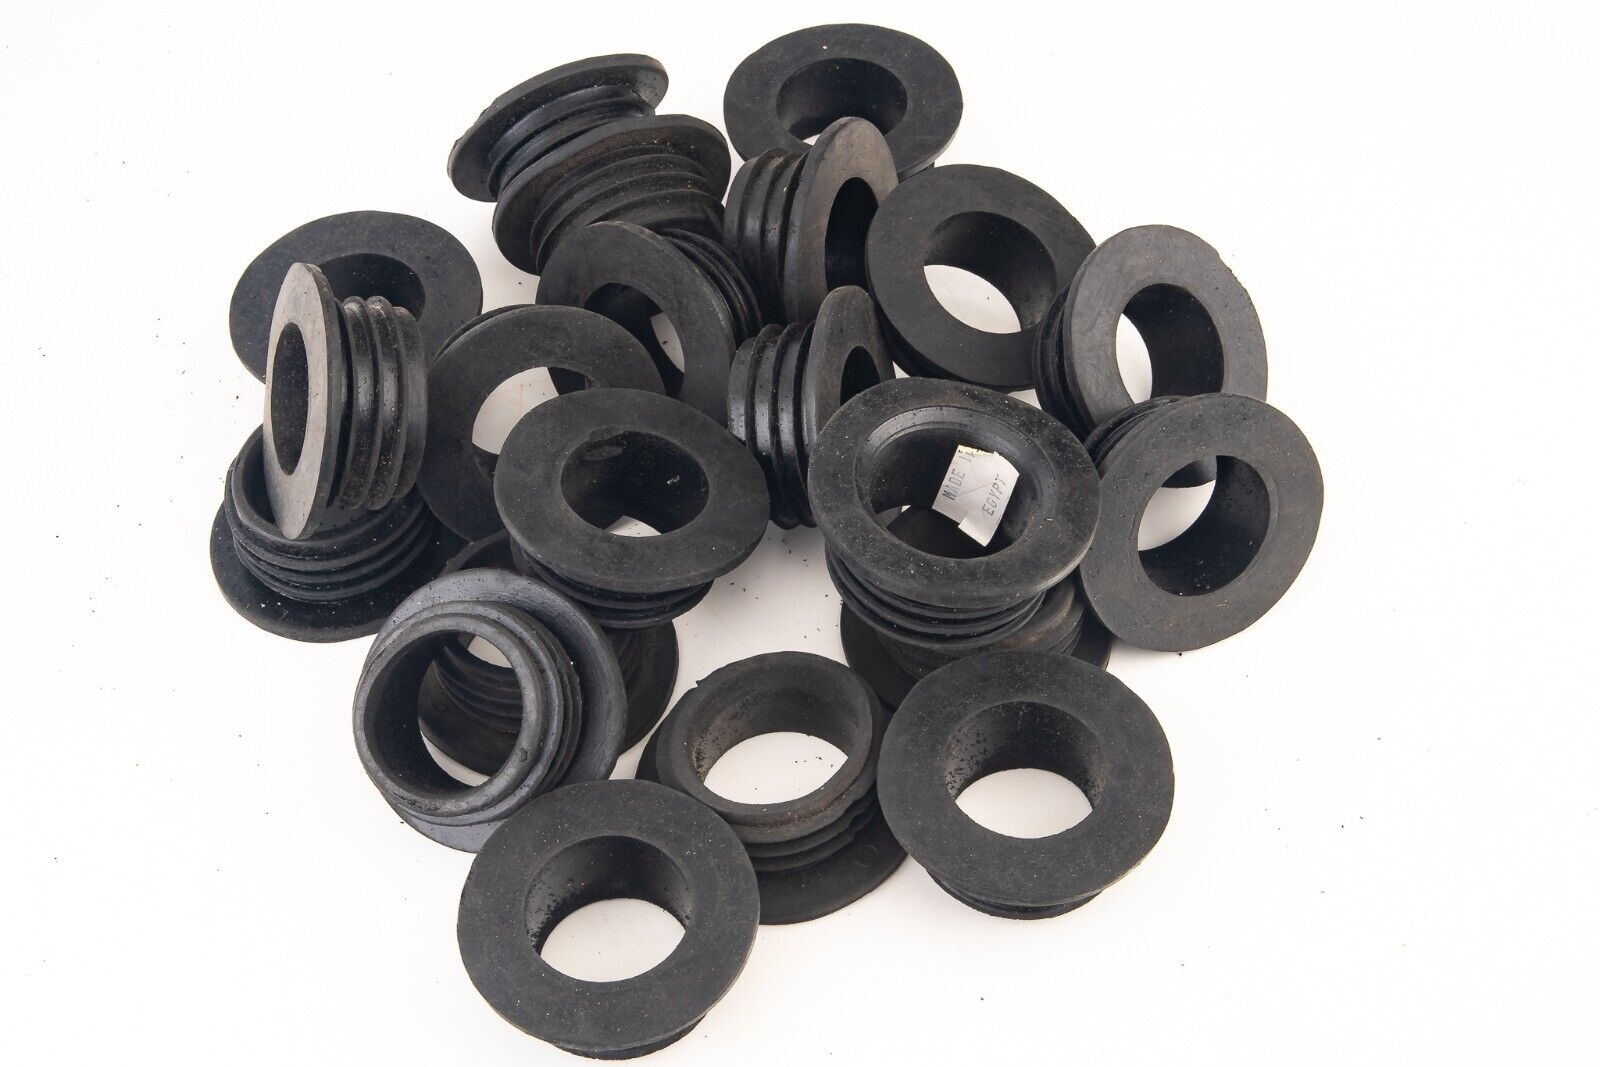 20 Pcs Black Hookah Hose Grommets Ribbed Silicone 2 1/2 x 1 1/8 BRAND NEW